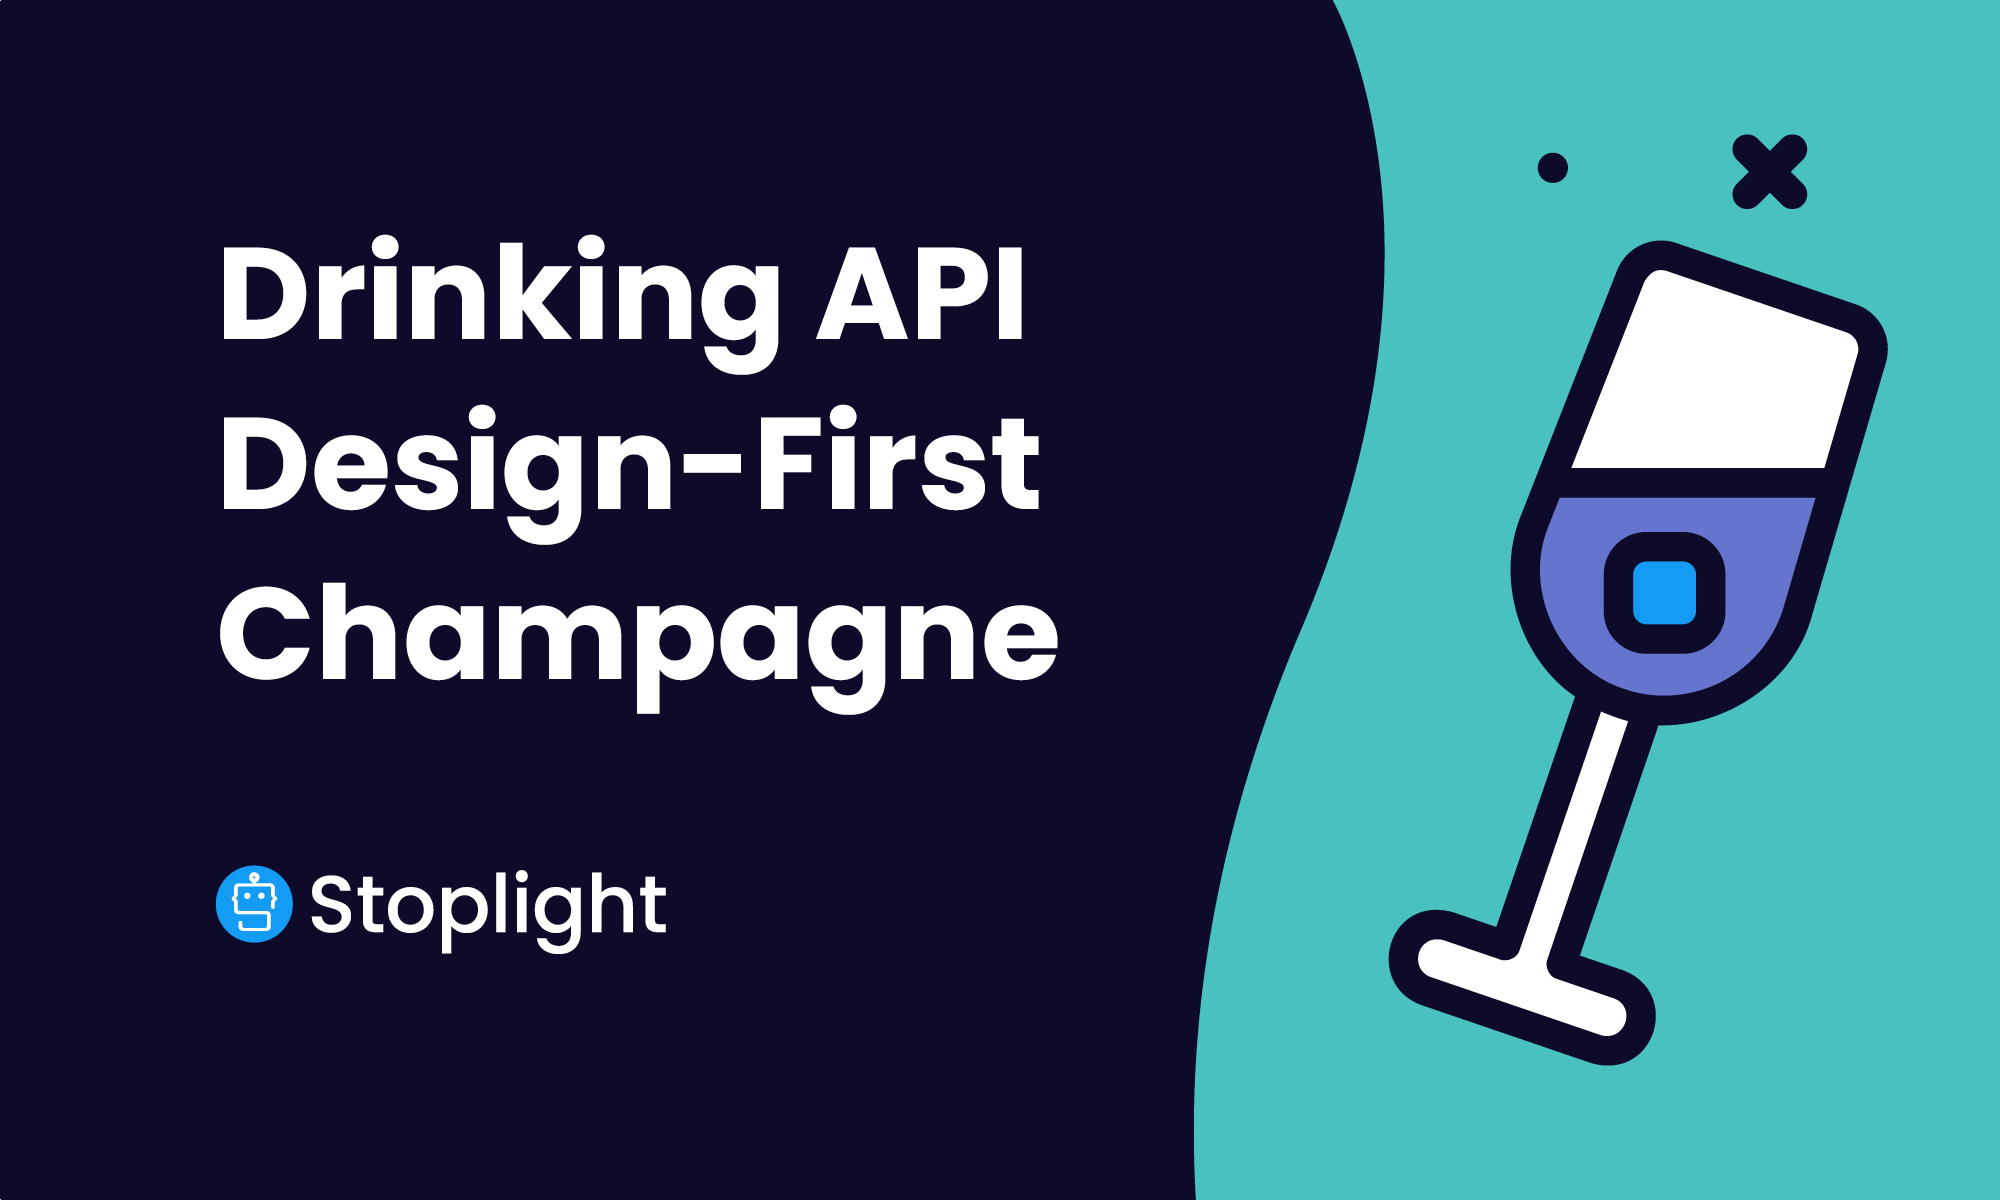 Drinking API Design-First Champagne